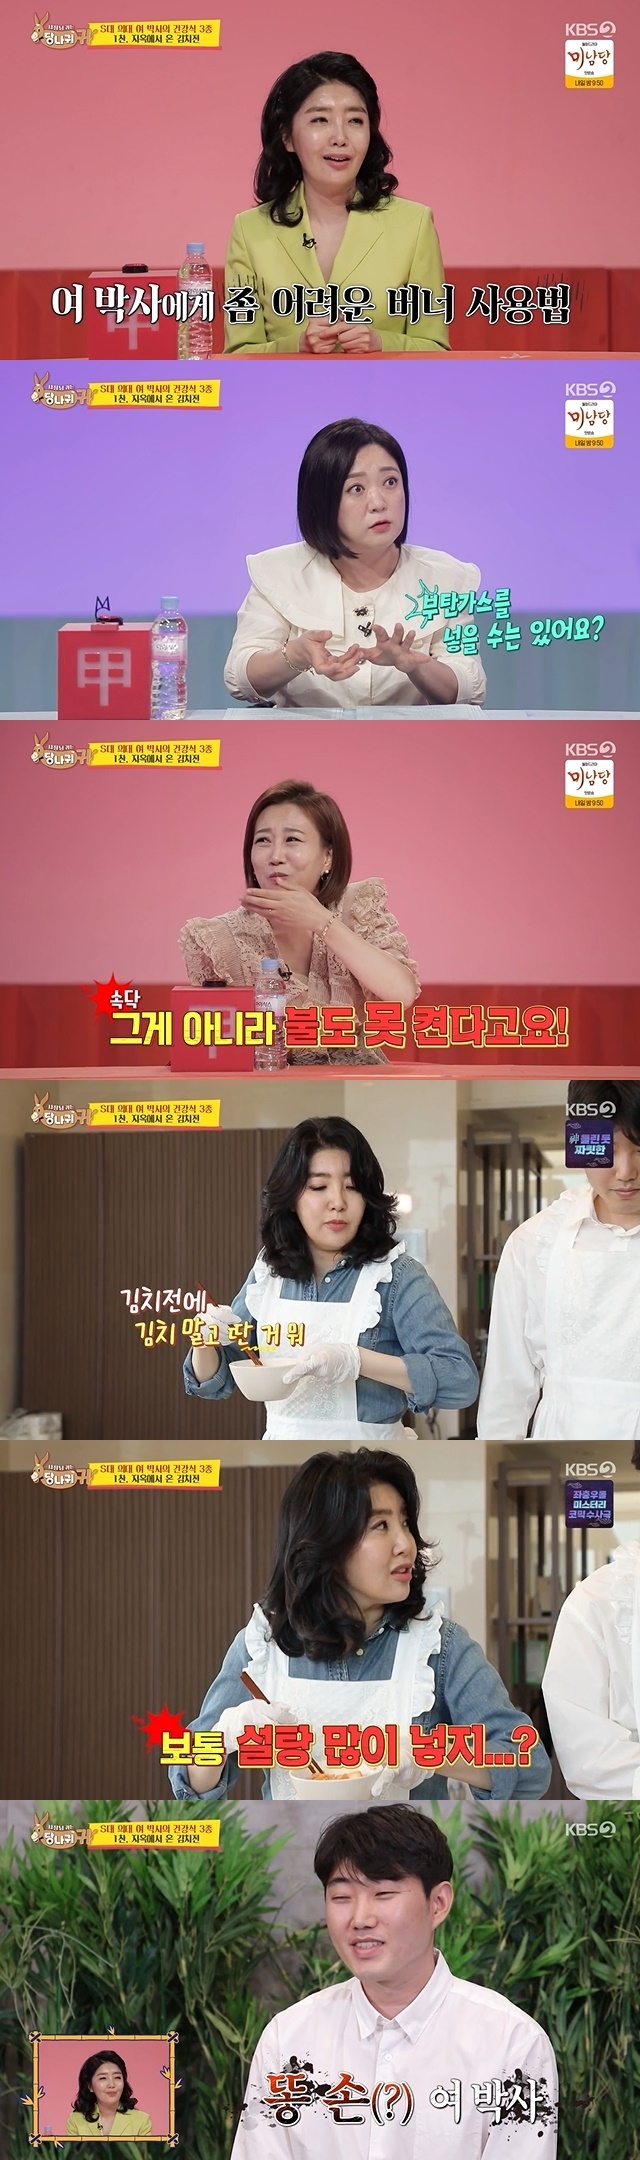 Jang Yun-jeong was stunned by Yeo Esther, who couldnt turn on burners lights.In the 162th KBS 2TV entertainment Boss in the Mirror (hereinafter referred to as The Ass ear) broadcast on June 26, Yeo Esther and the marketing team leader Oh Woo-chang, who made a surprise visit to the companys employee Dormitory, were portrayed.On this day, Yeo Esther visited the employee Dormitory and tried to cook. She plans to give her employees a healthy diet.Do you do food? he said, I see the taste well.First, Yeo Esther made kimchi with kimchi and oatmeal from Mart.Yeo Esther refuted MCs words that if I was going to use Mart kimchi, I would rather buy the finished food. I am not careful. I am very impressed that I did not cook Gimbap for my children.Then a shock statement from Yeo Esther was drawn: She told the team leader, Turn the lights on the burner.I dont know how to turn on the lights, said Jang Yun-jeong, who was surprised more than anyone else, and Kim Sook asked, Do you know how to put butane gas?Its not that, its not even a fire, Jang Yun-jeong whispered on behalf of Yeo Esther.On the other hand, Yeo Esther was surprised by the splashing oil of kimchi, saying, How much do you lose to our company when I get burned? And showed a fuss about looking for sugar to make it more delicious.I also rolled up the chimbap with the next food and rolled my plastic feet together.